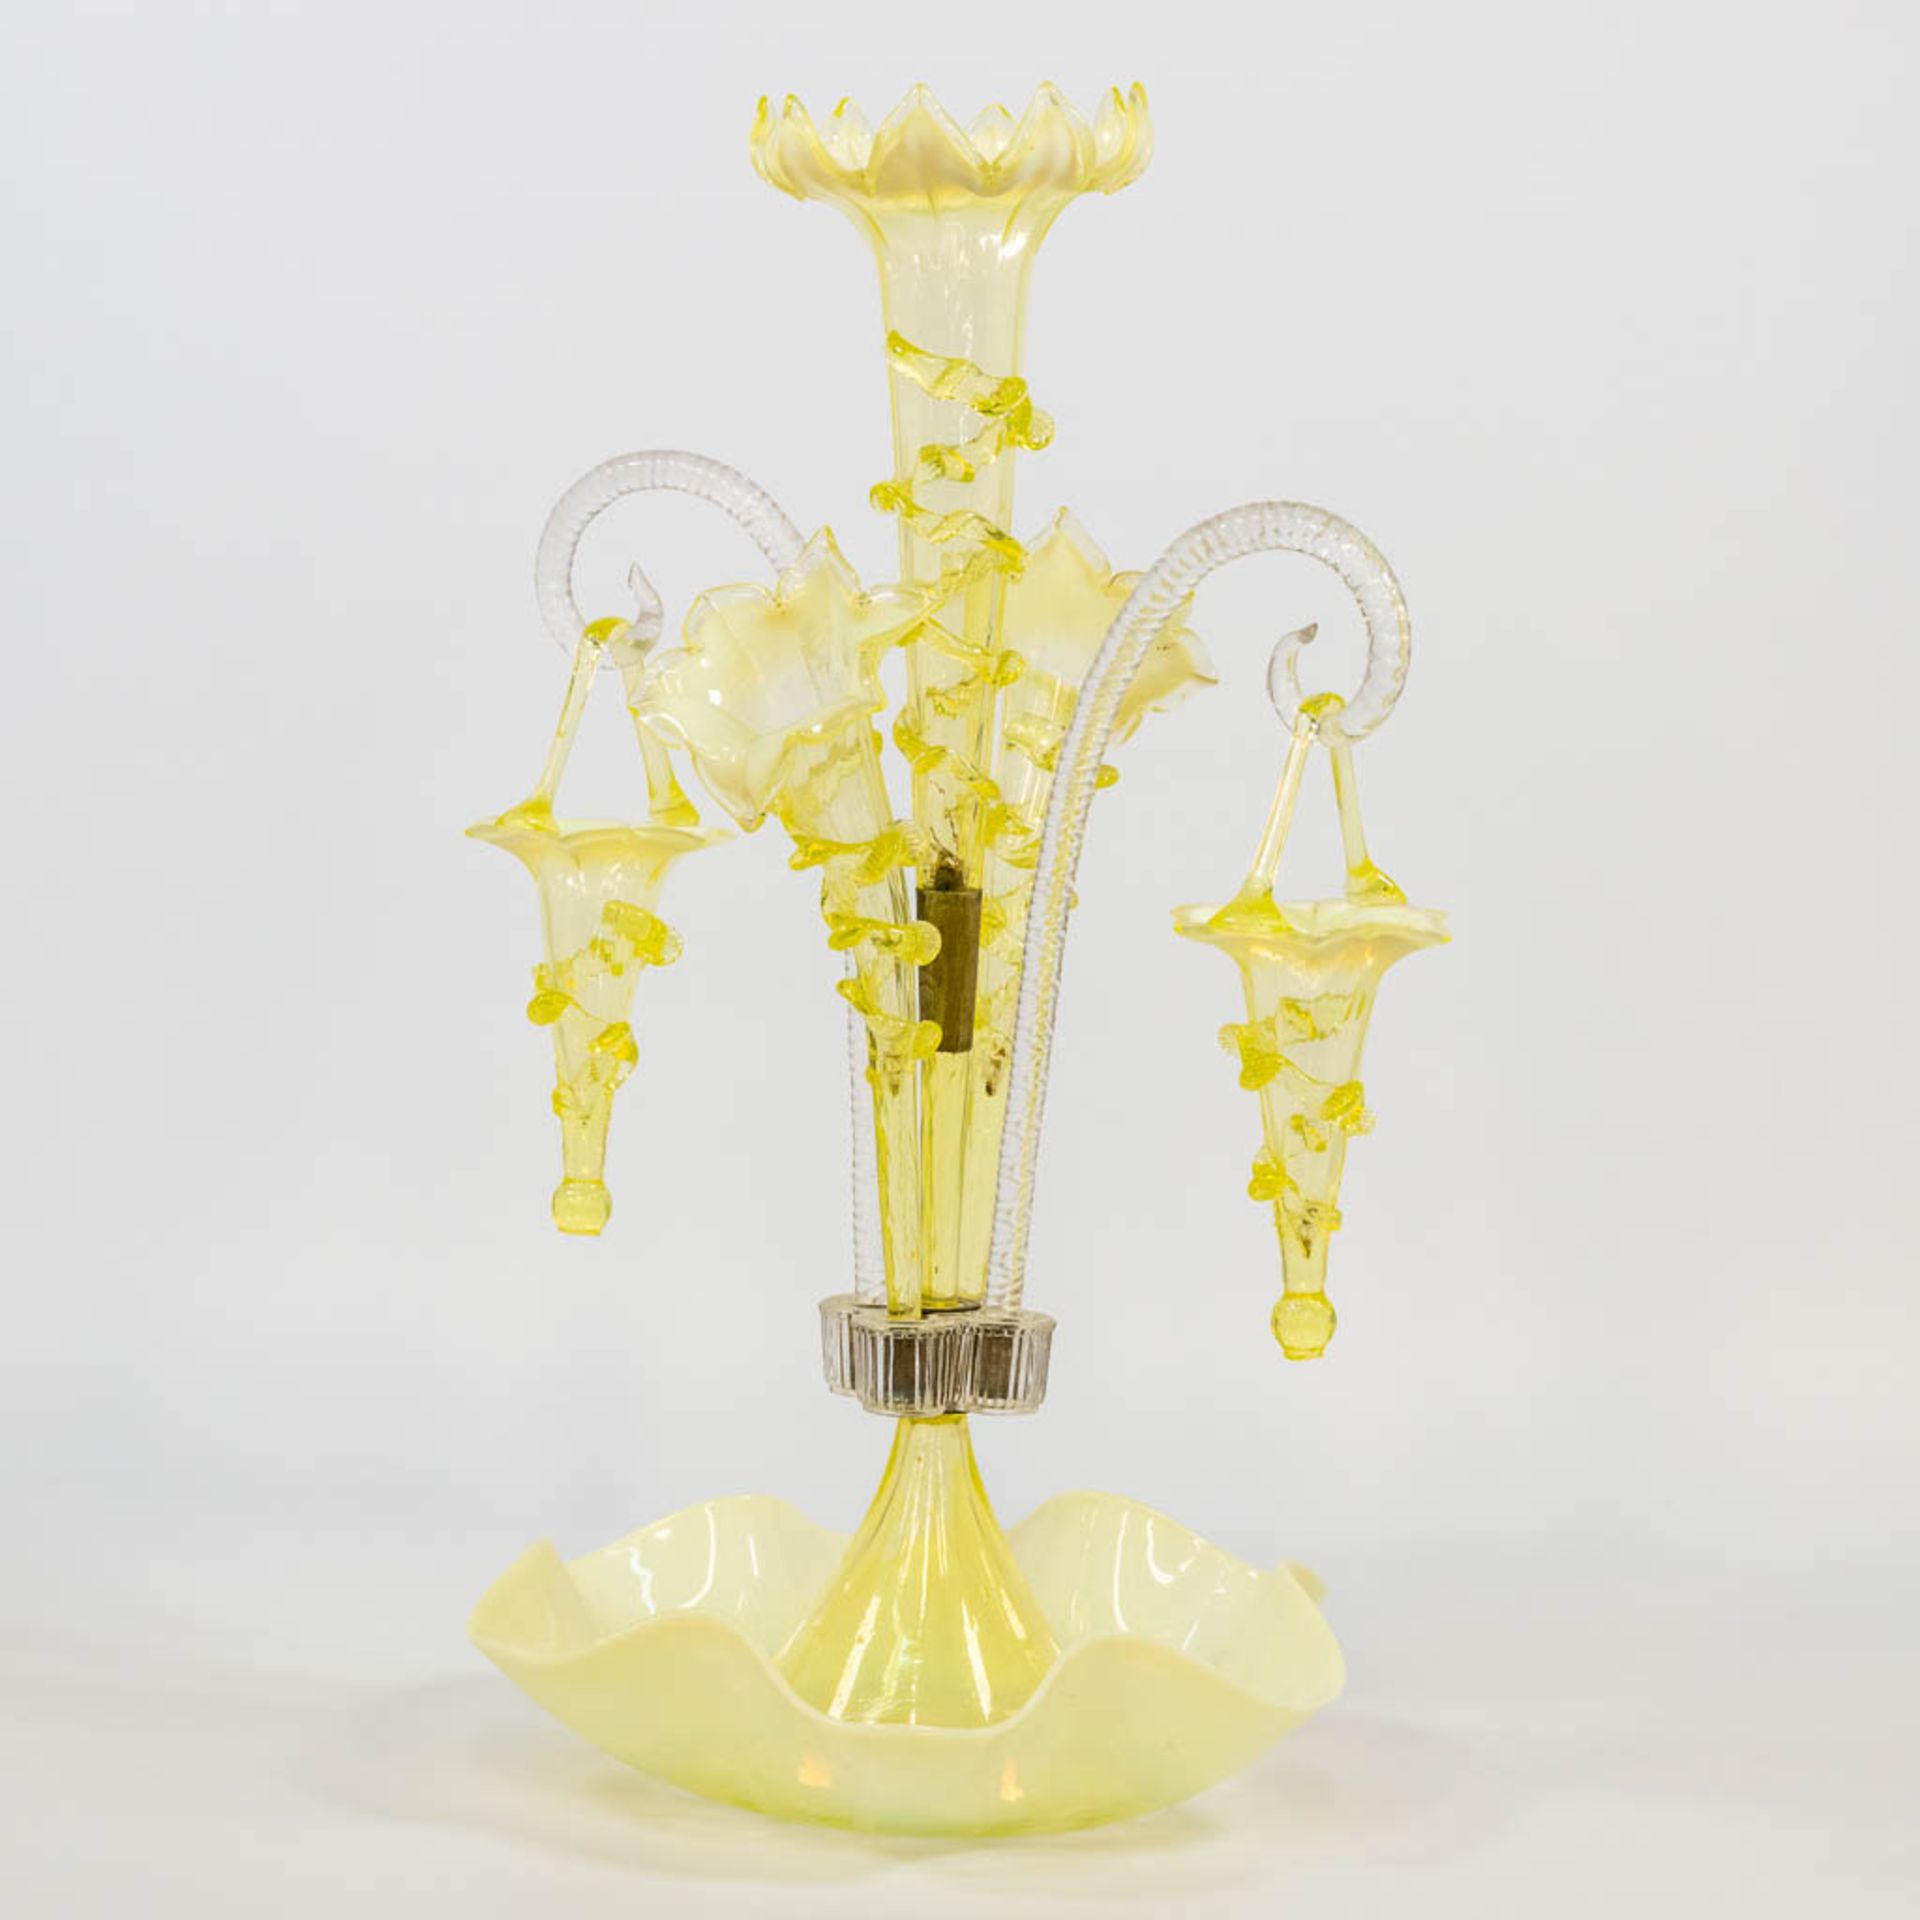 A yellow and clear glass table centrepiece pic-fleur, made in Murano, Italy. (25 x 28 x 45 cm) - Image 5 of 15